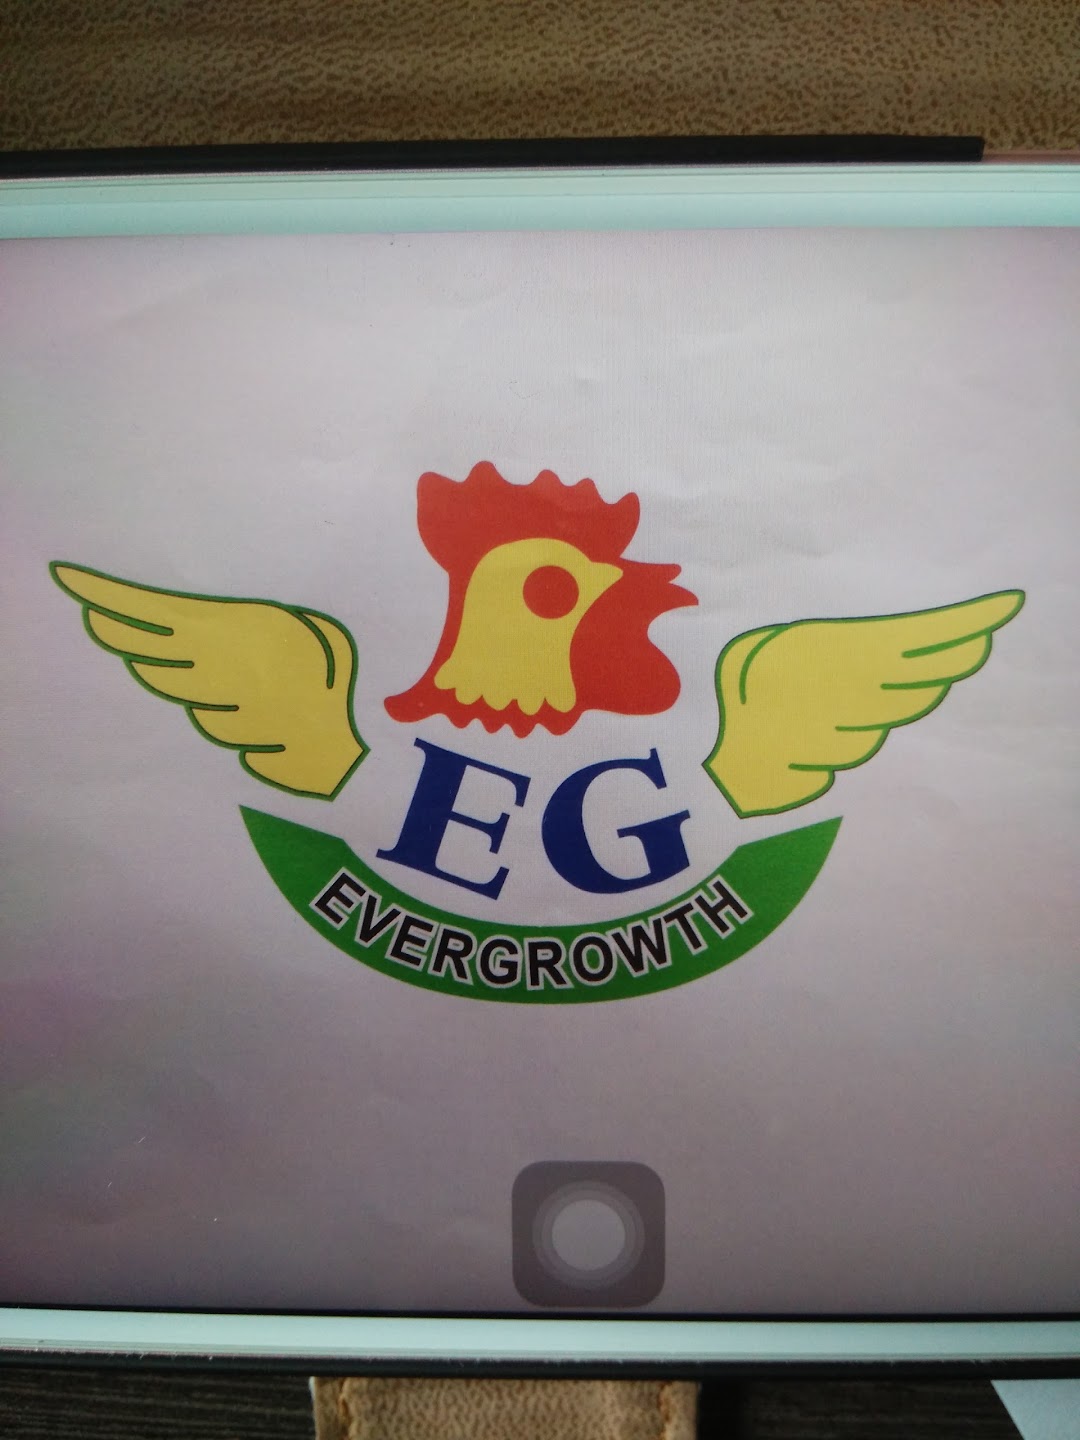 Evergrowth Integrated Food Industries Sdn Bdh